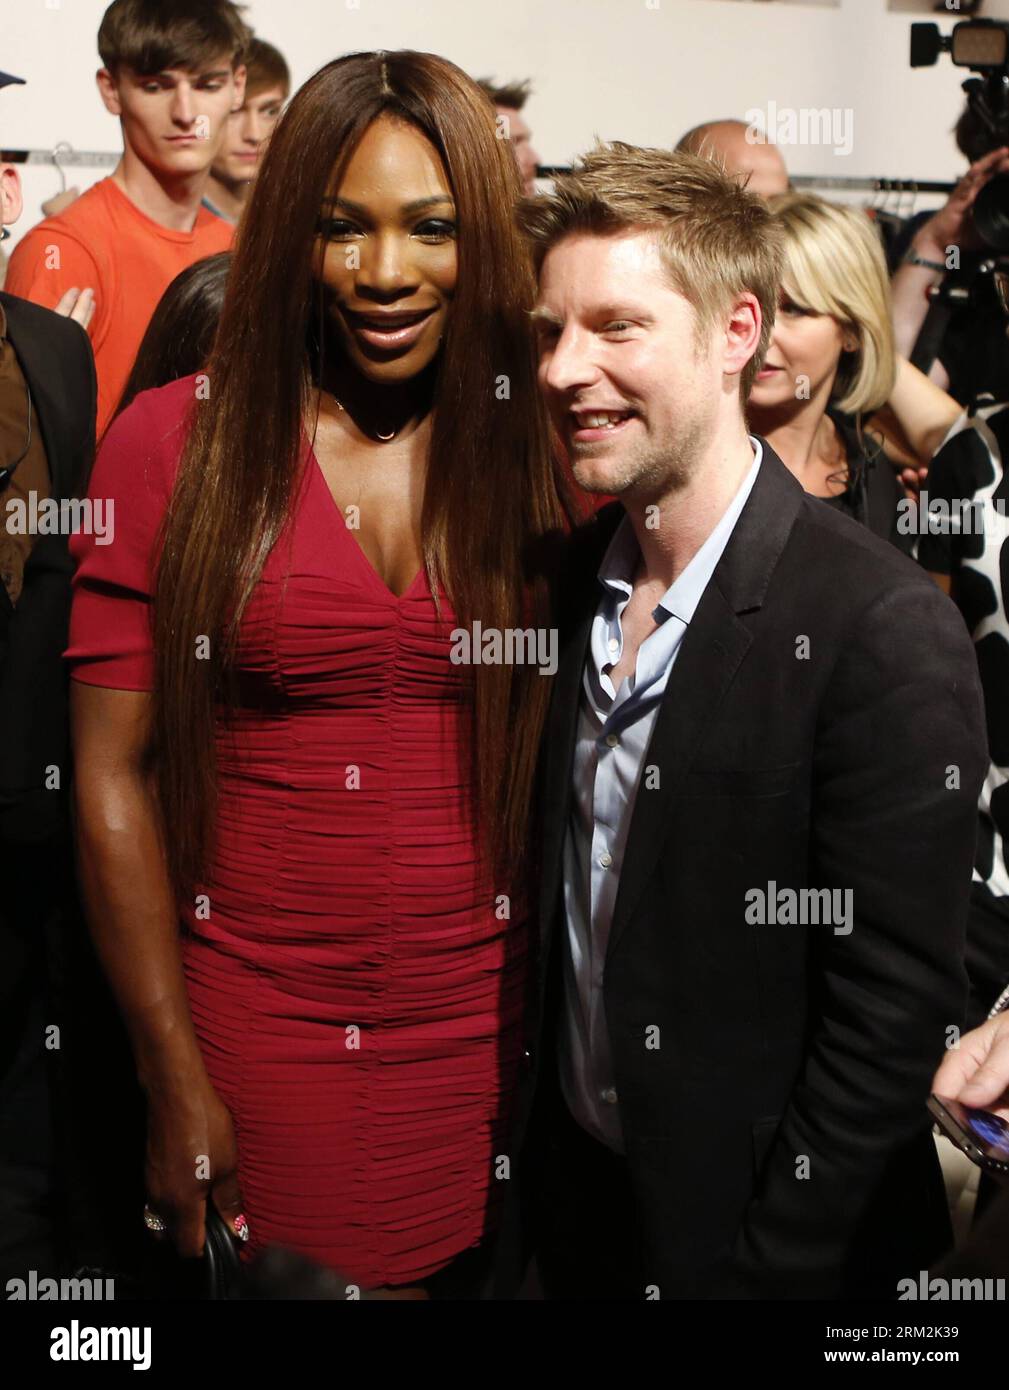 LONDON, June 18, 2013 - American professional tennis player Serena Williams (L) and Burberry Chief Creative Officer Christopher Bailey pose backstage at Burberry Menswear Spring/Summer 2014 at Kensington Gardens in London, Britain on June 18, 2013. (Xinhua/Wang Lili) BRITAIN-LONDON-FASHION-MENSWEAR-BURBERRY PRORSUM PUBLICATIONxNOTxINxCHN Stock Photo